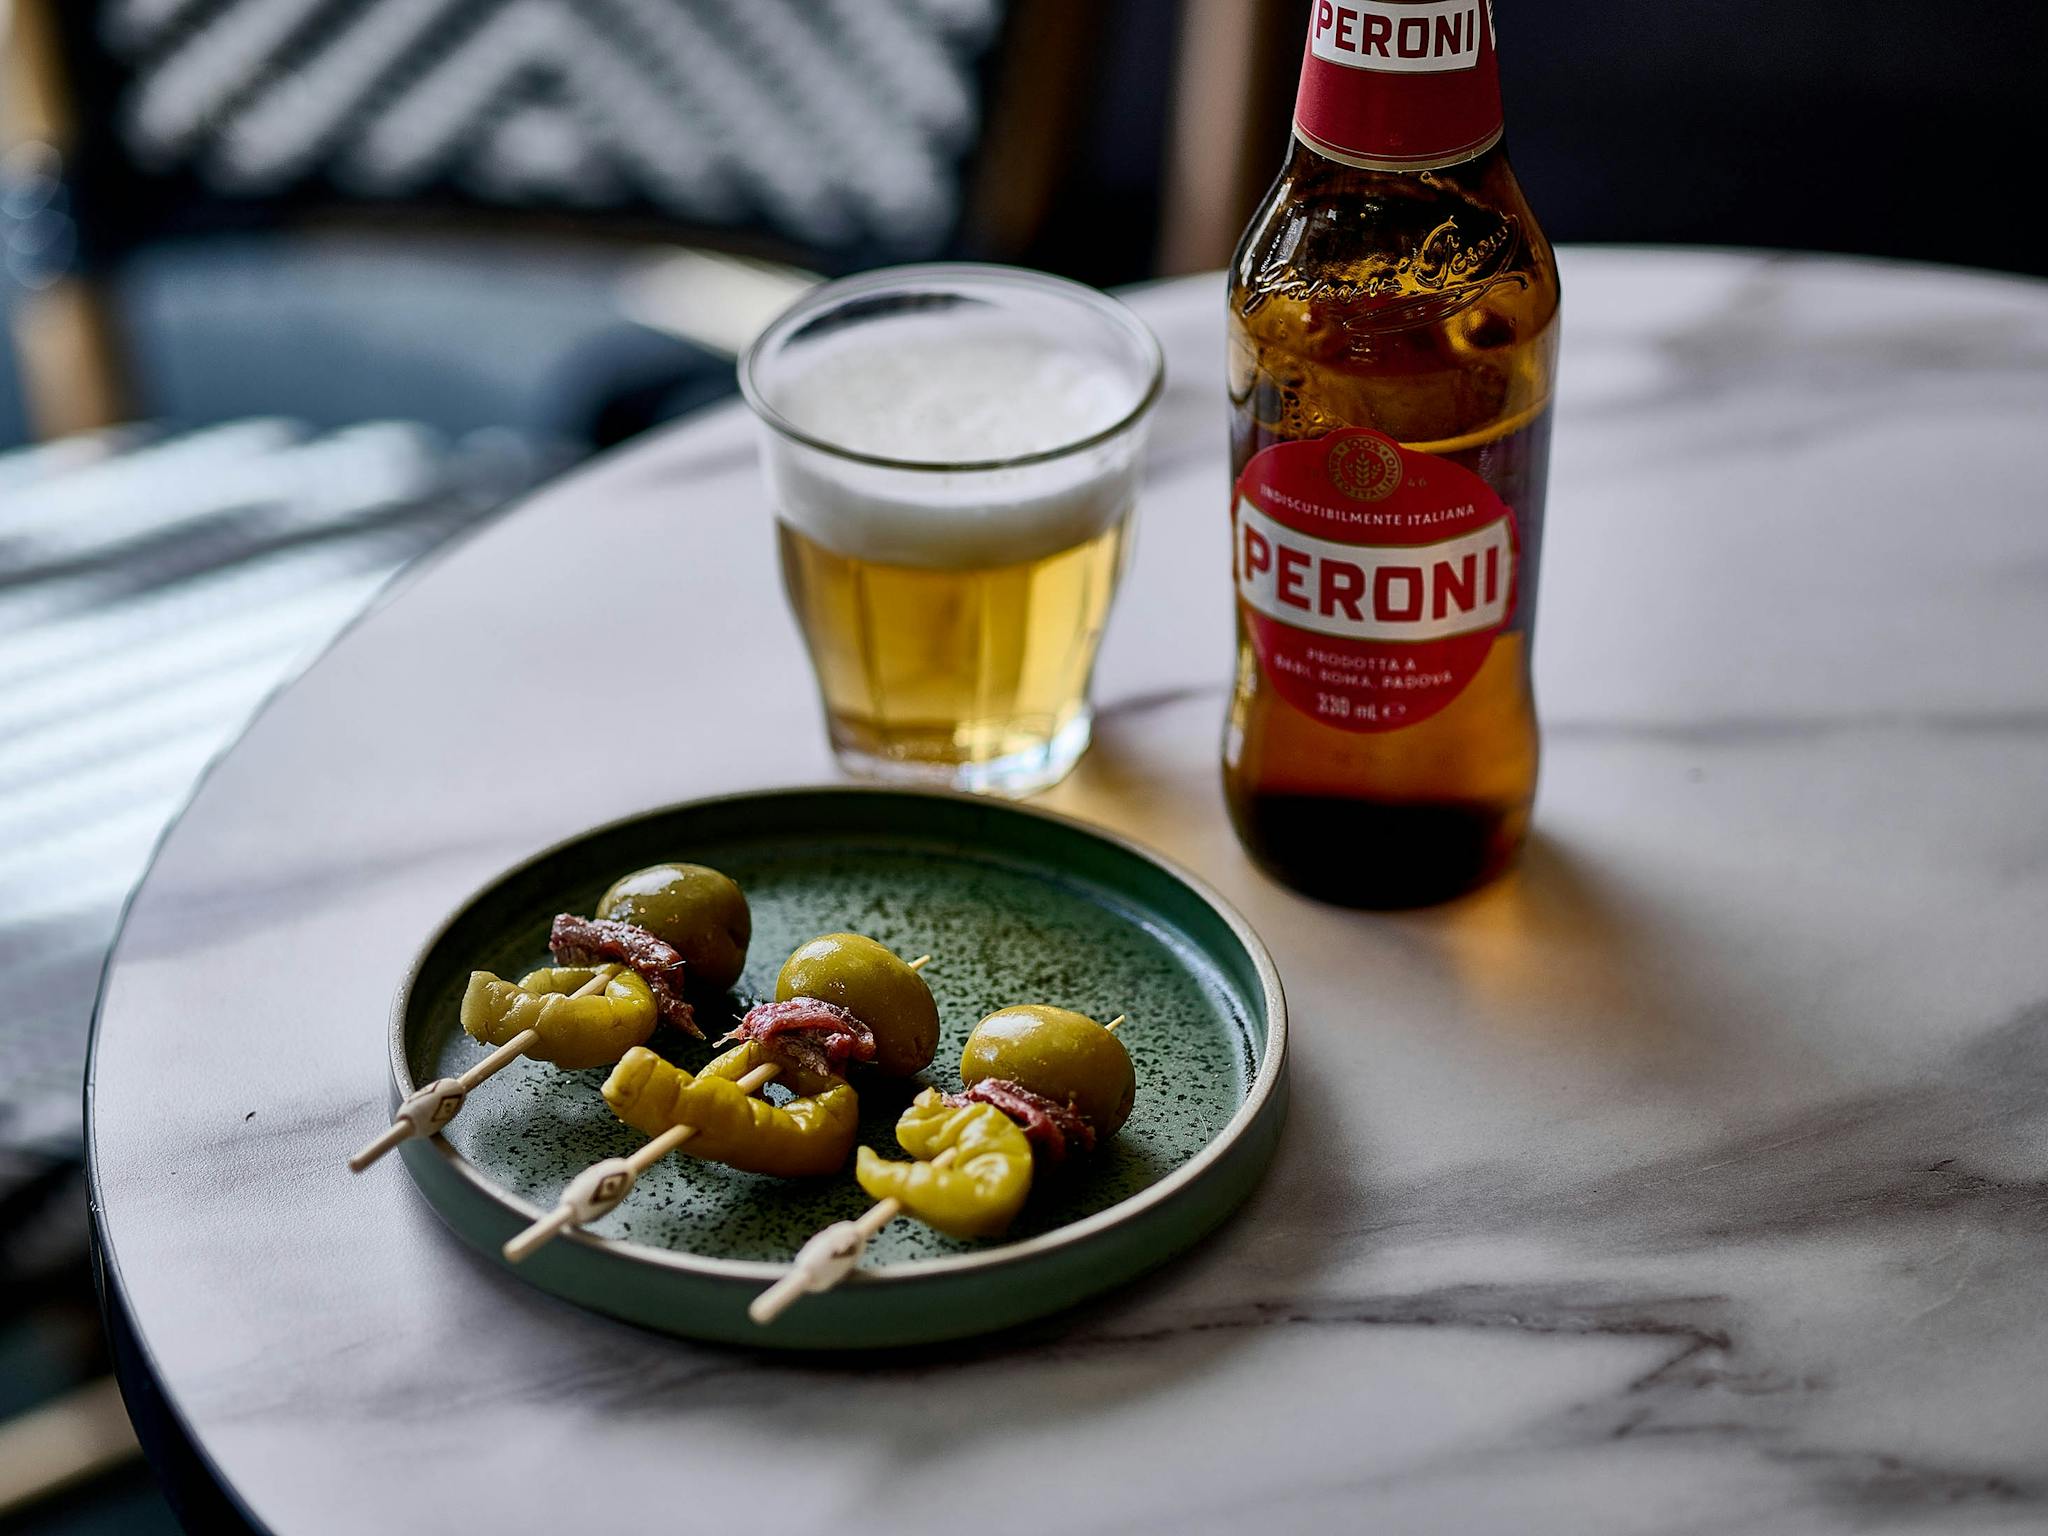 Peroni beer served with 3 Gilda - anchovie, olive and pepper skewers